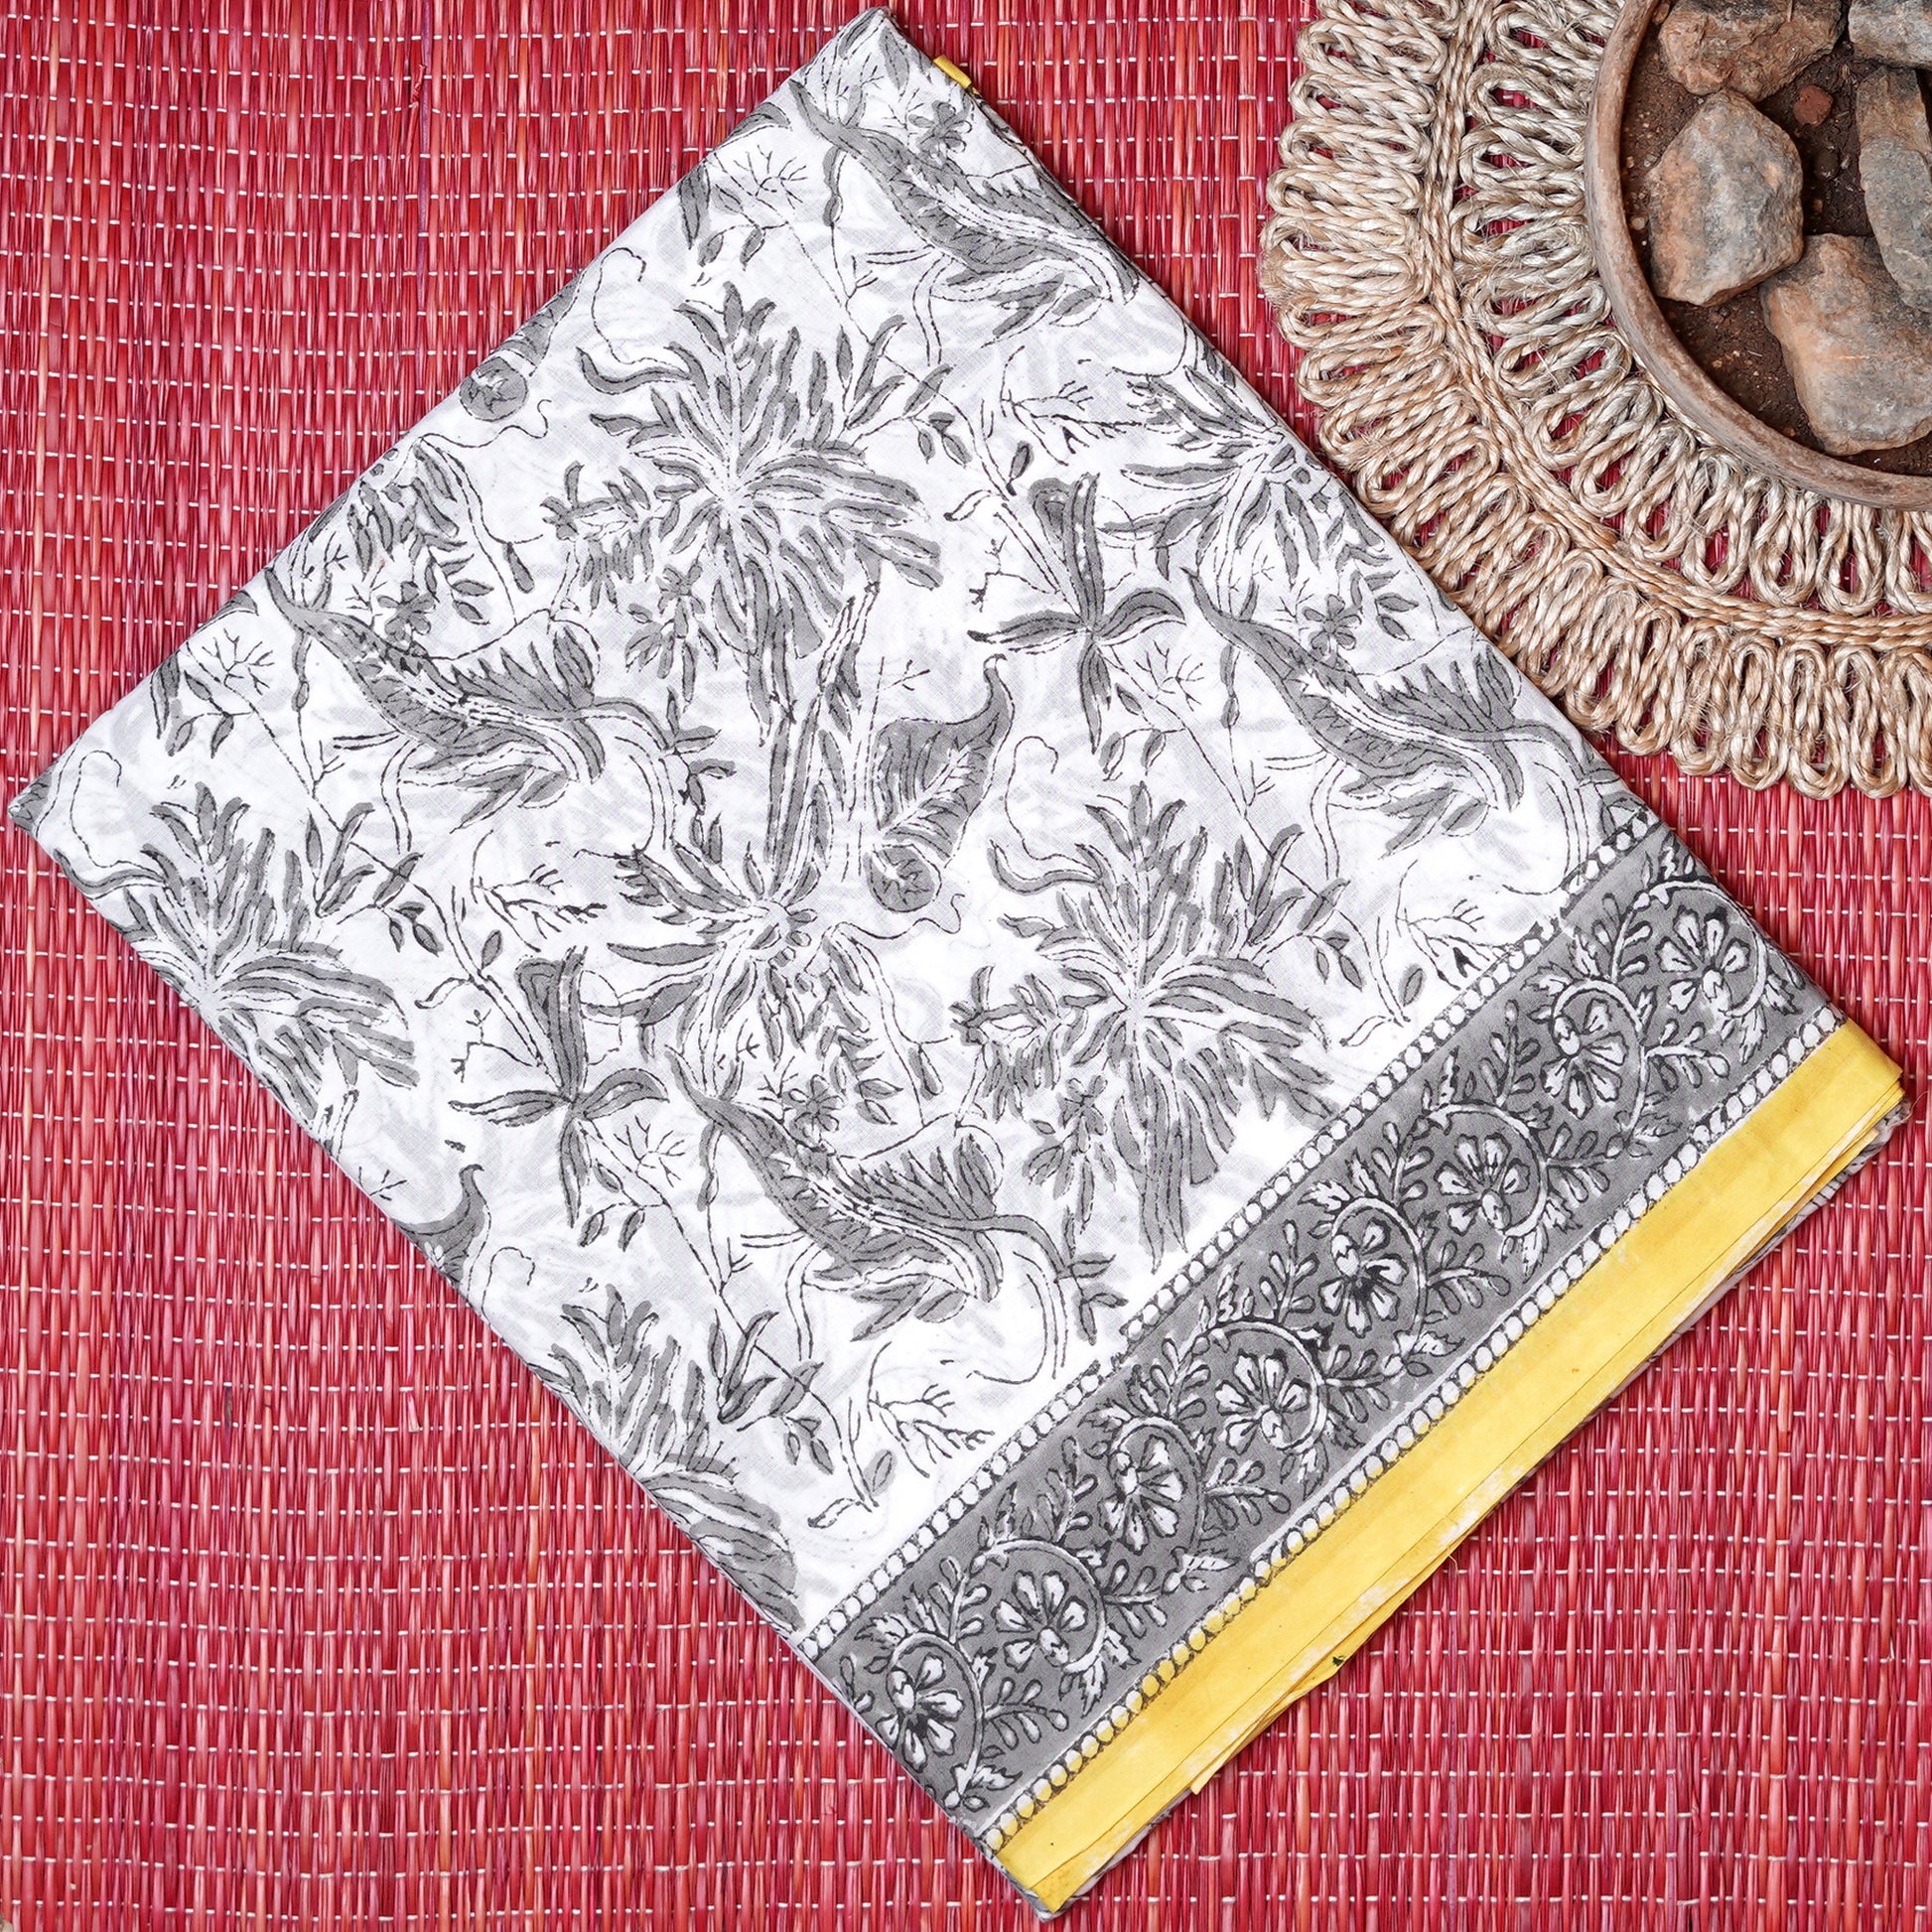 Shop Sophisticated White and Grey Mul Cotton Saree, perfect for any occasion